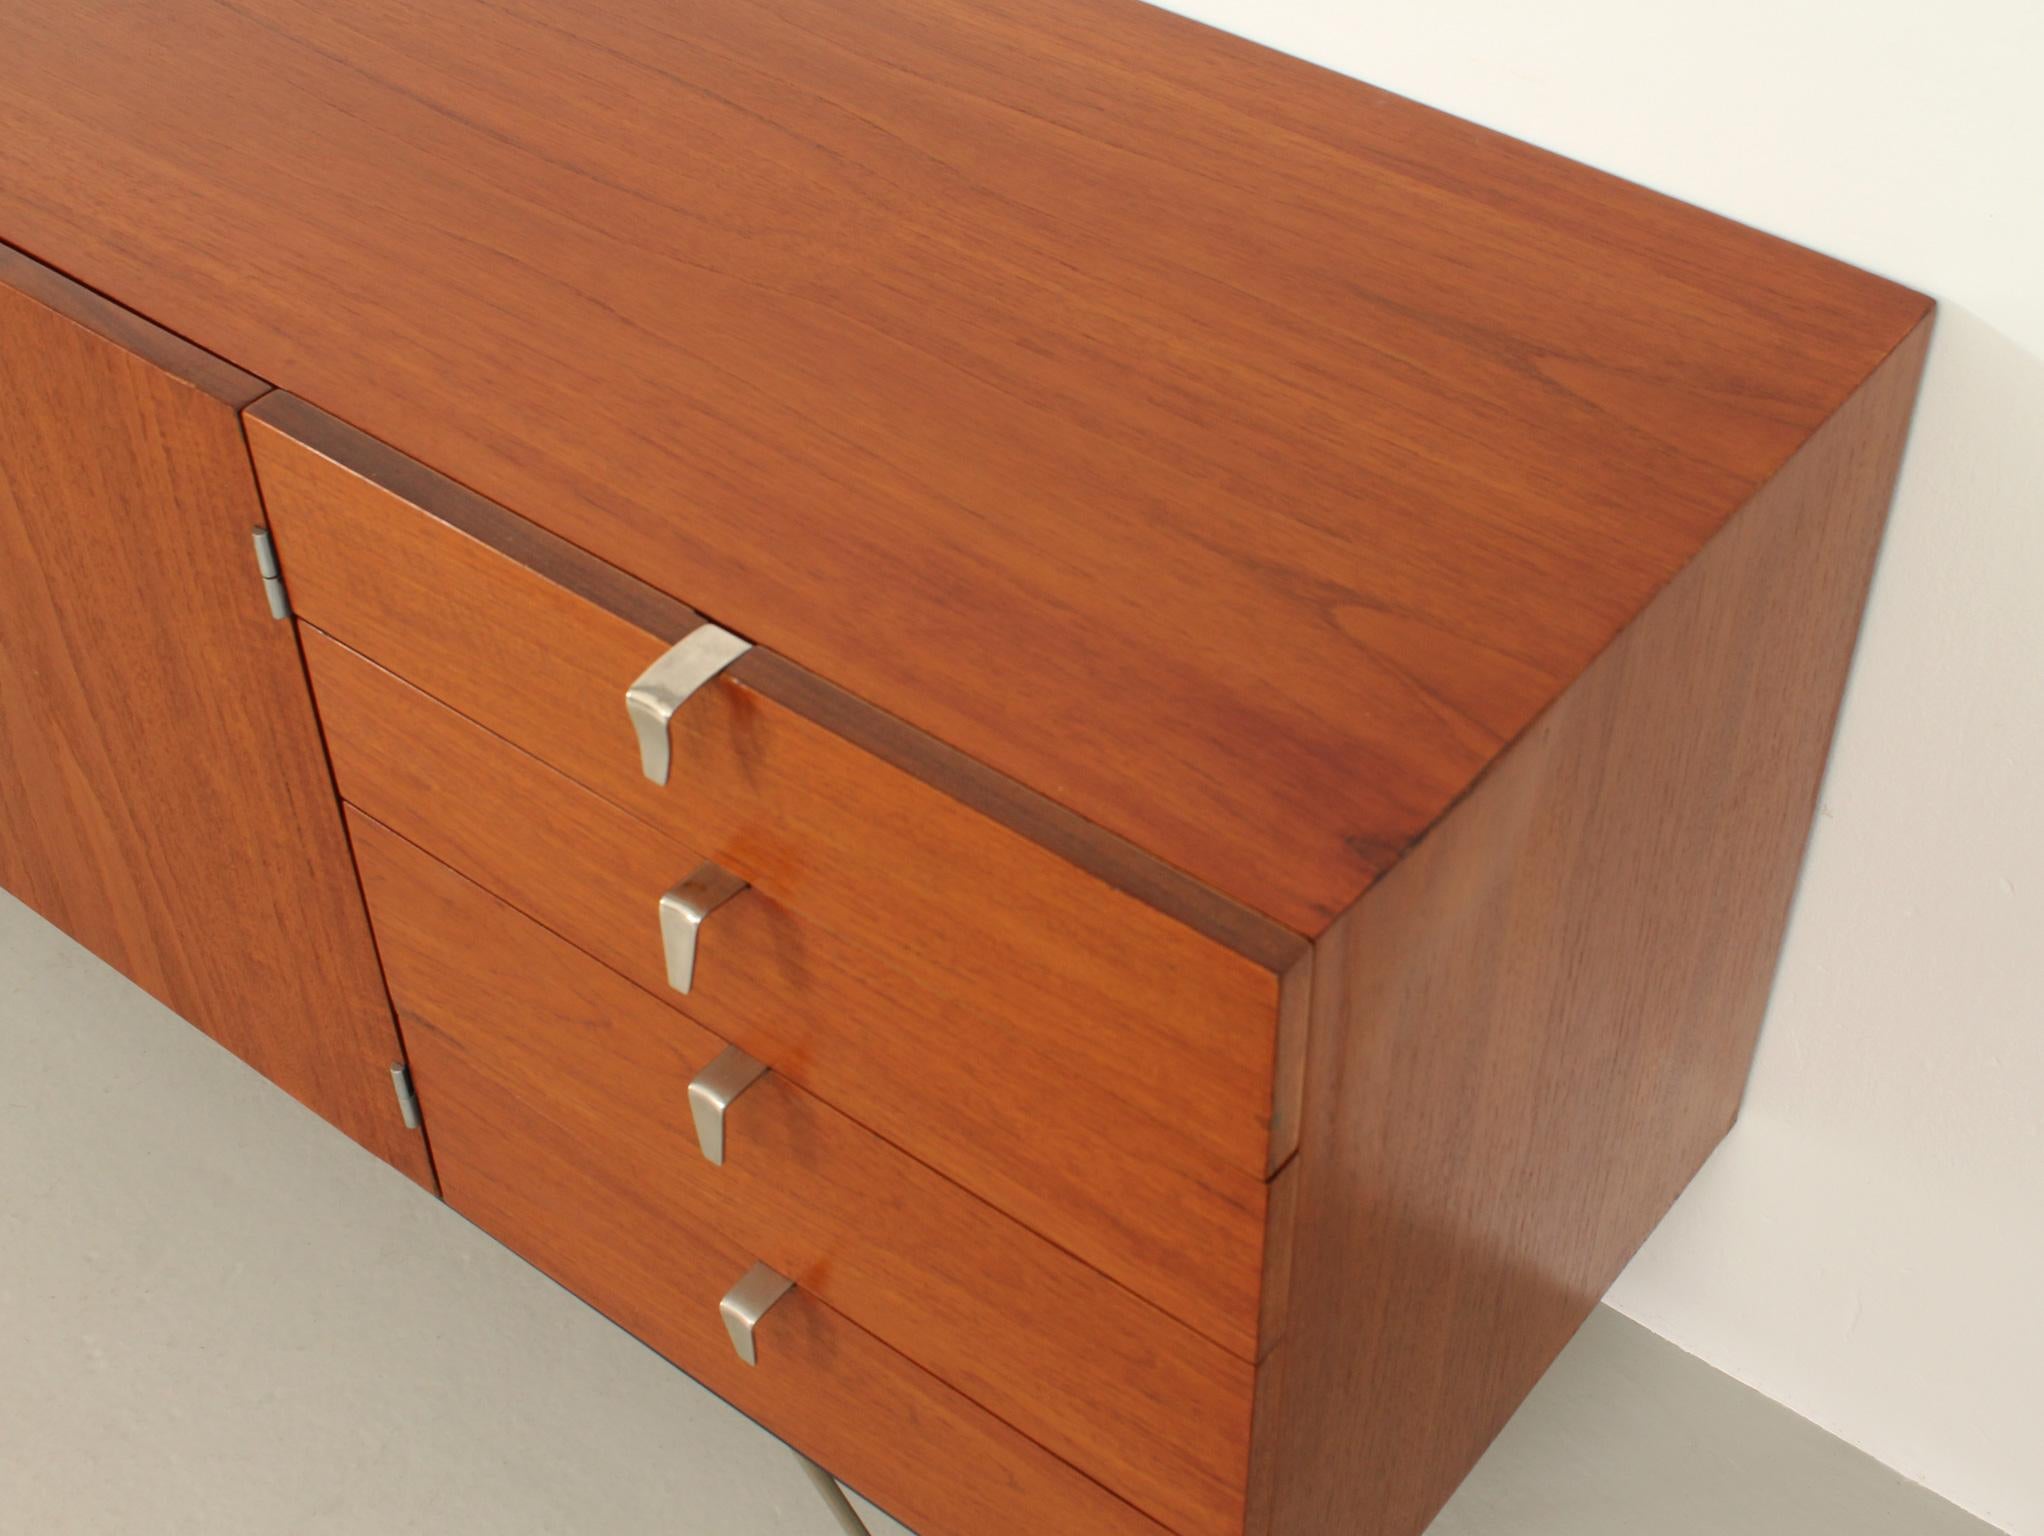 Mid-Century Modern S Range Sideboard by John and Sylvia Reid for Stag Furniture, UK, 1959 For Sale